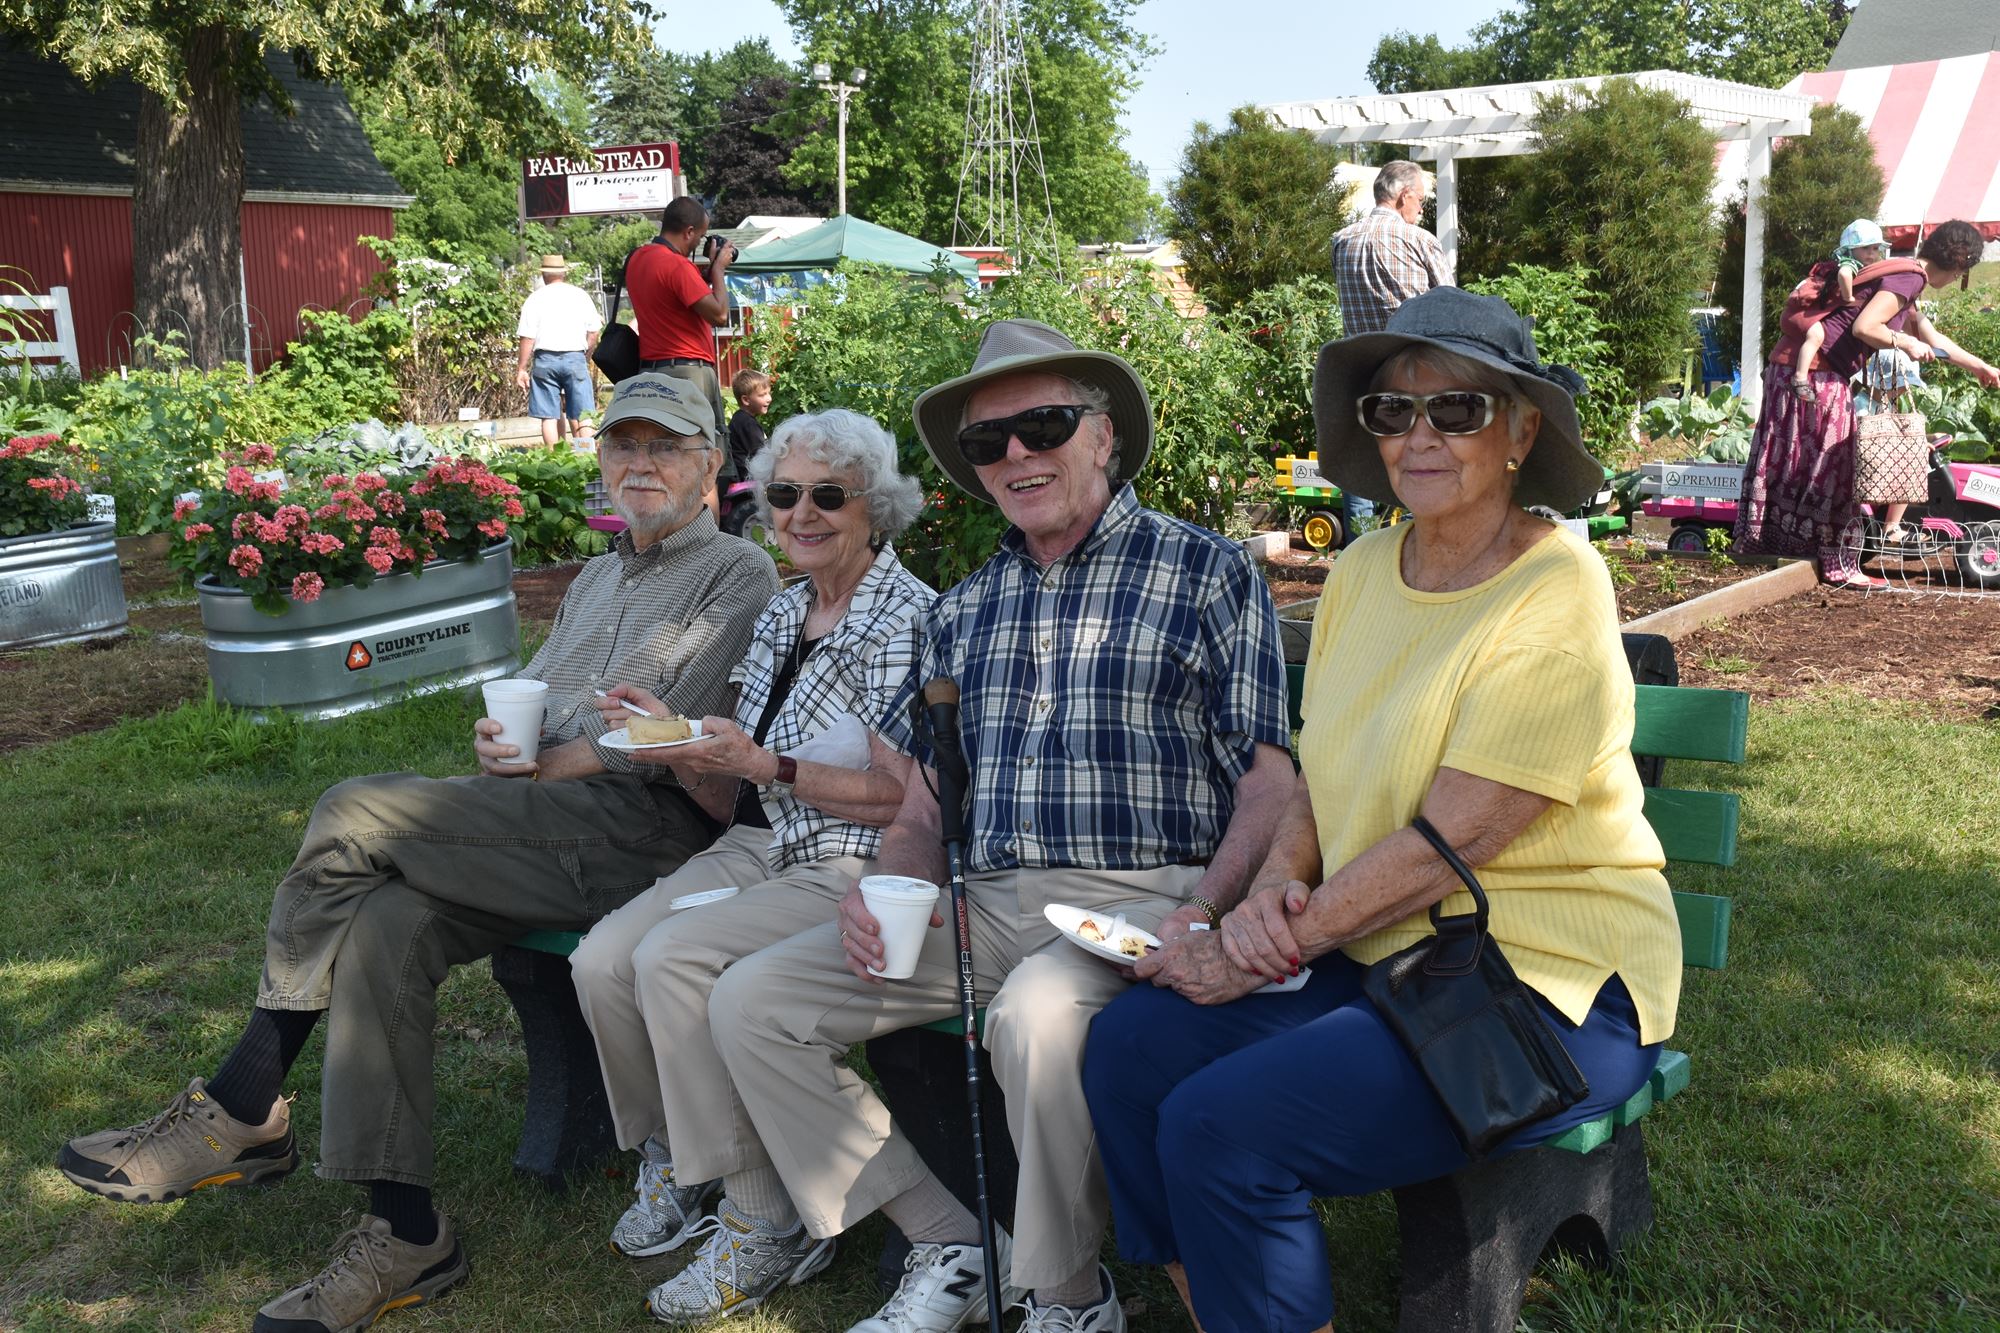 Senior Citizens Day - Tuesday, July 23